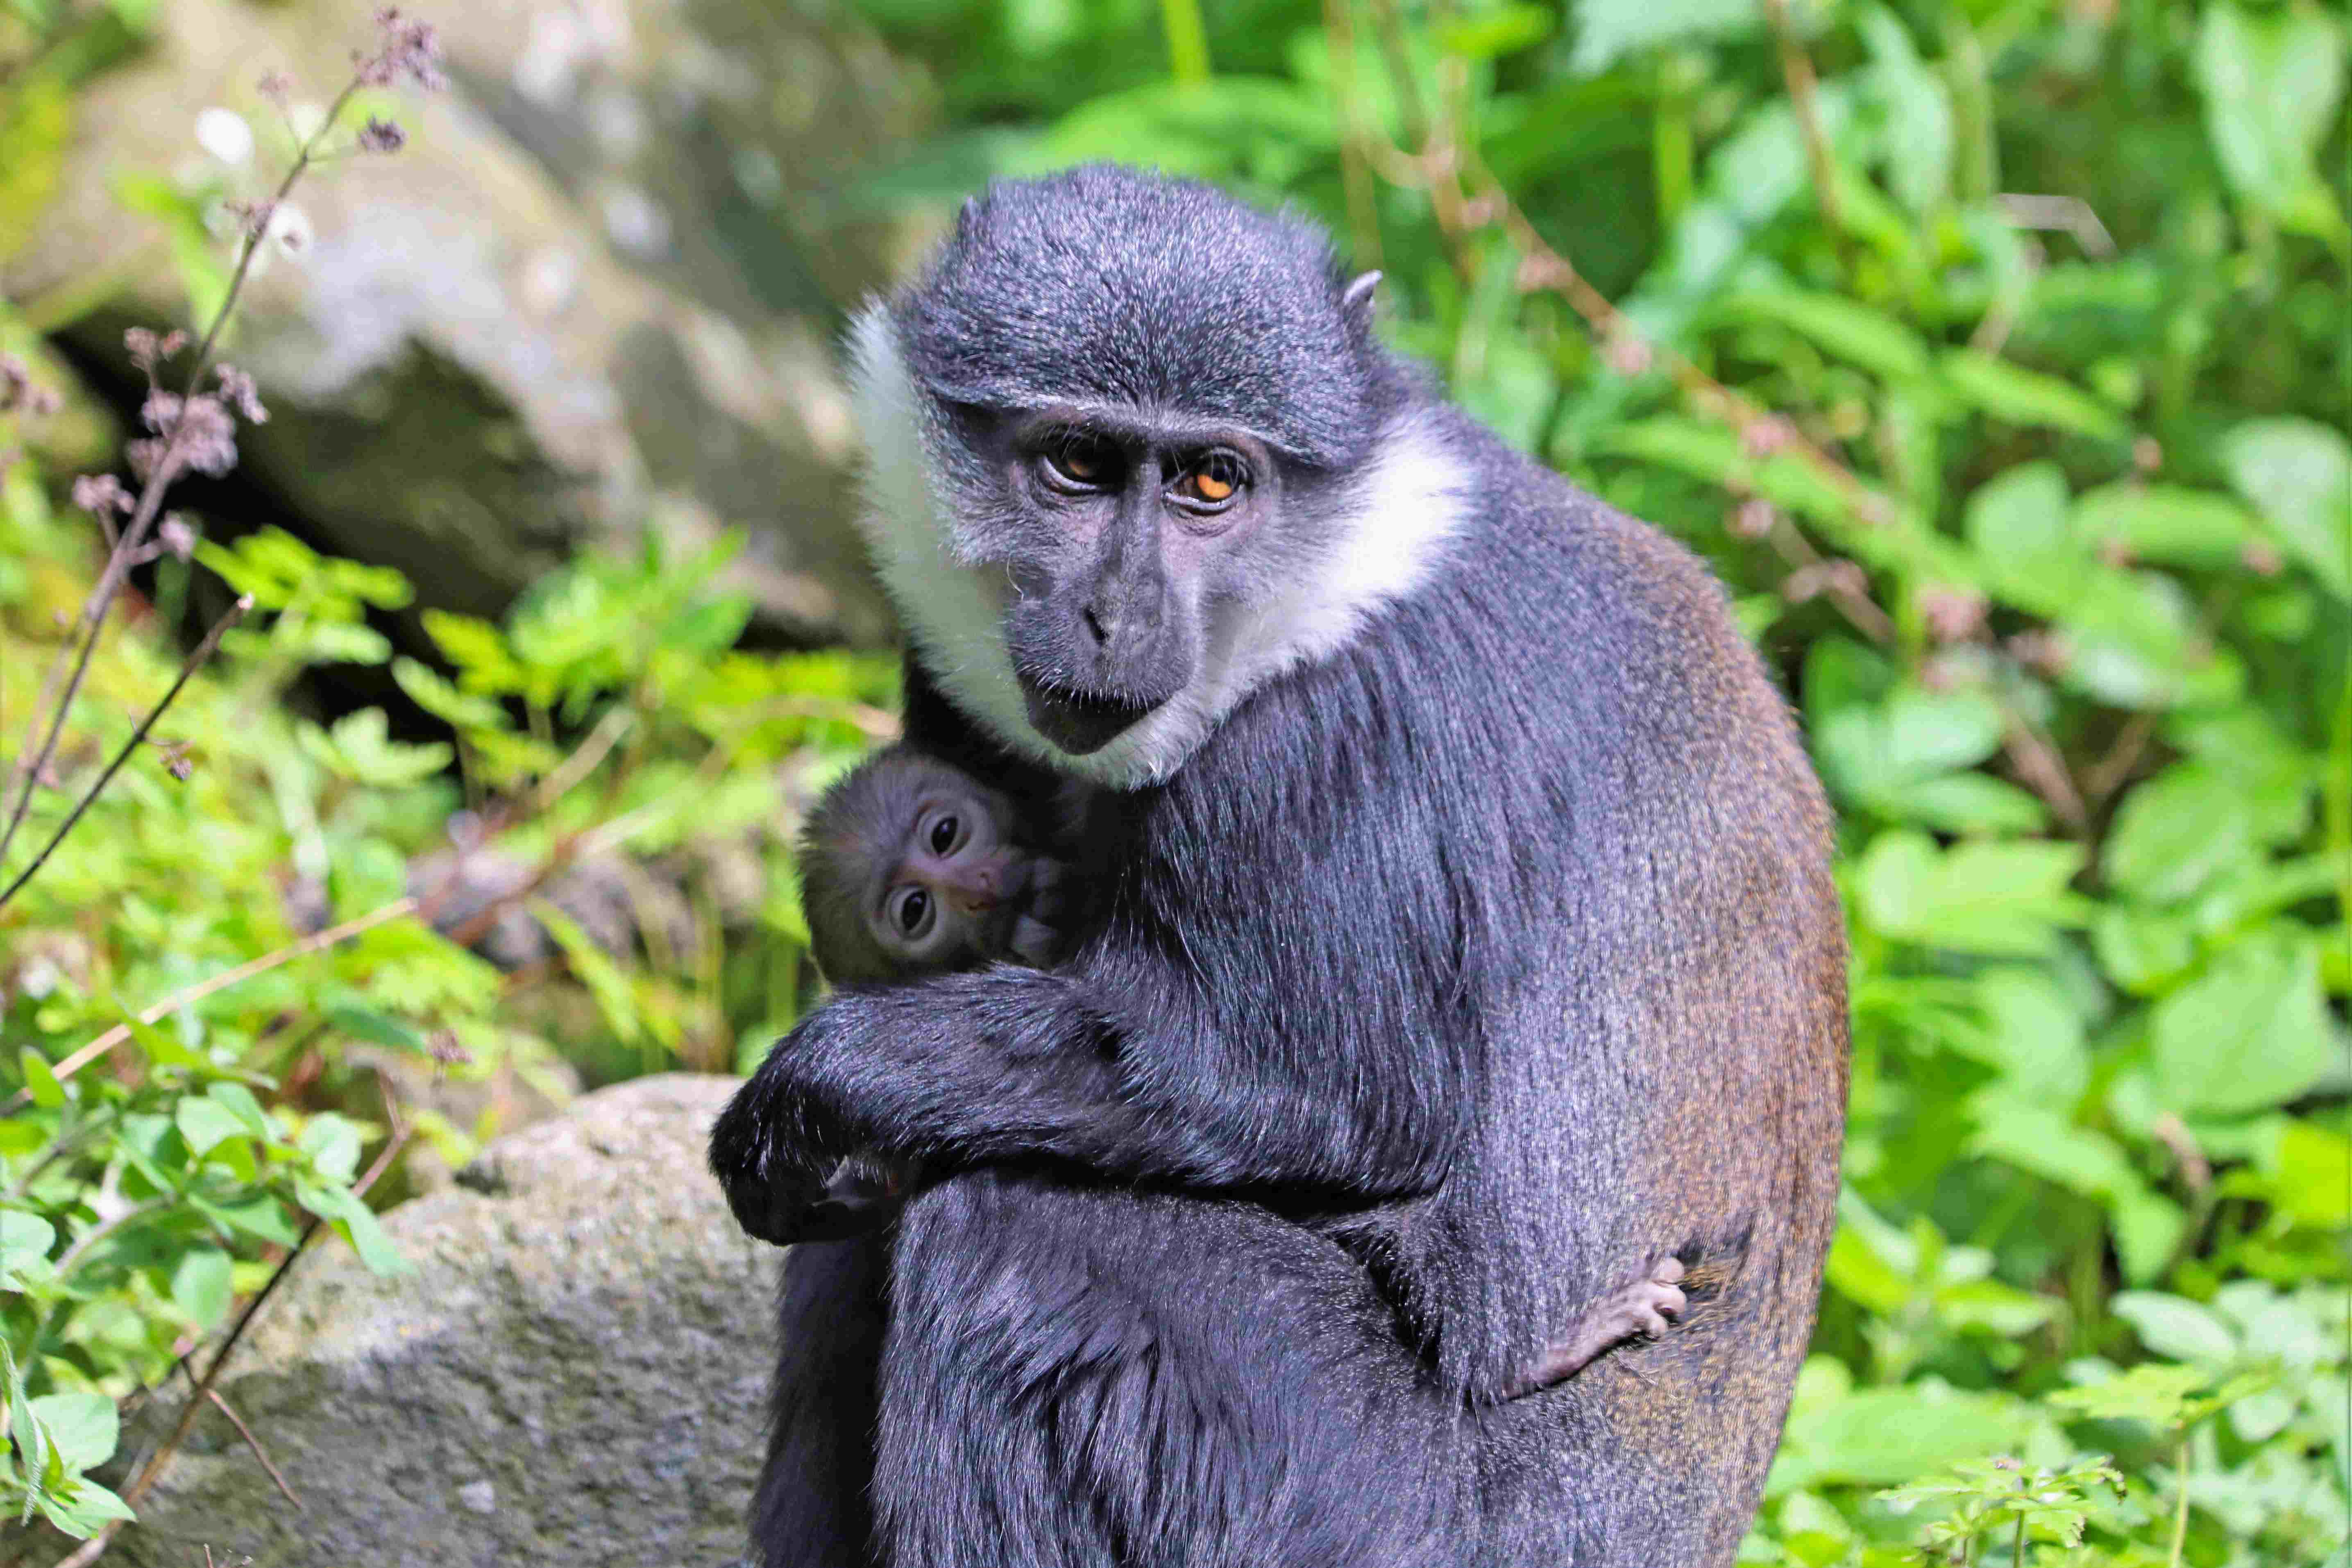 L'hoest monkey sitting and holding baby monkey close to chest

Image: AMY MIDDLETON 2023